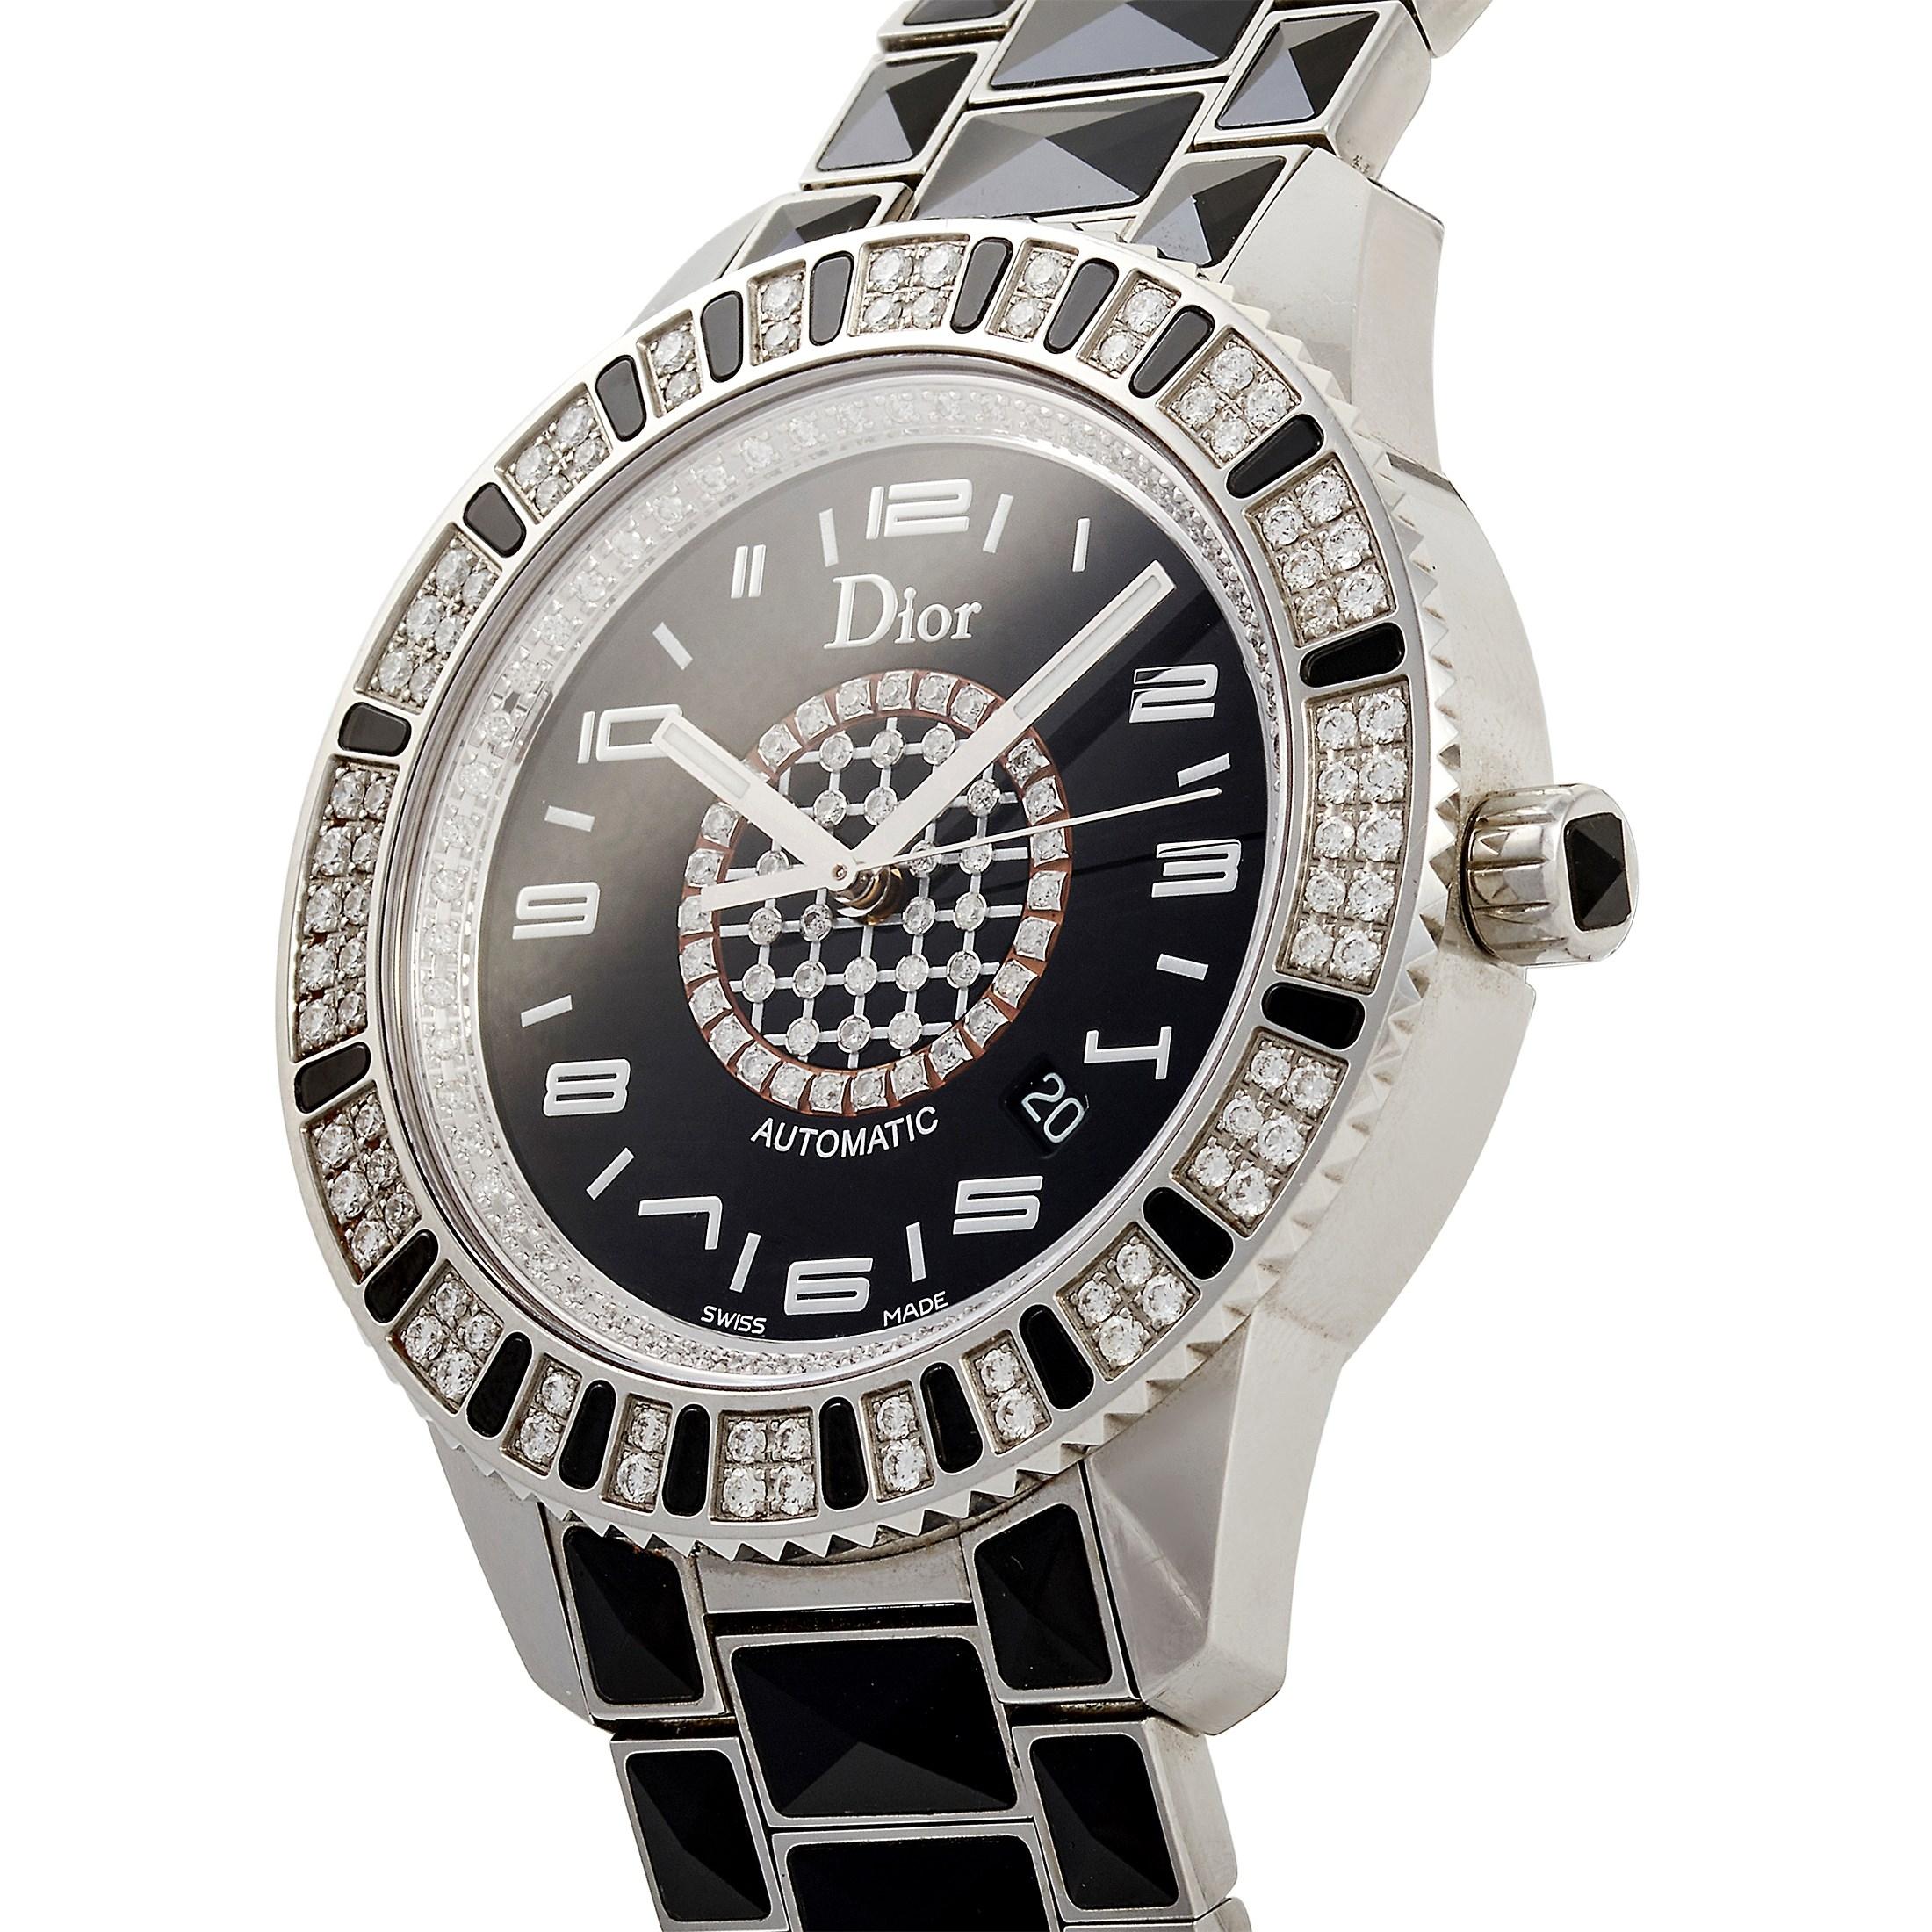 Dior Christal Stainless Steel Diamond 42mm watch, reference number CD115511, comes with a stainless steel case that measures 40.5 mm in diameter and includes a bezel set with diamonds and black gemstones. The case is presented on a matching